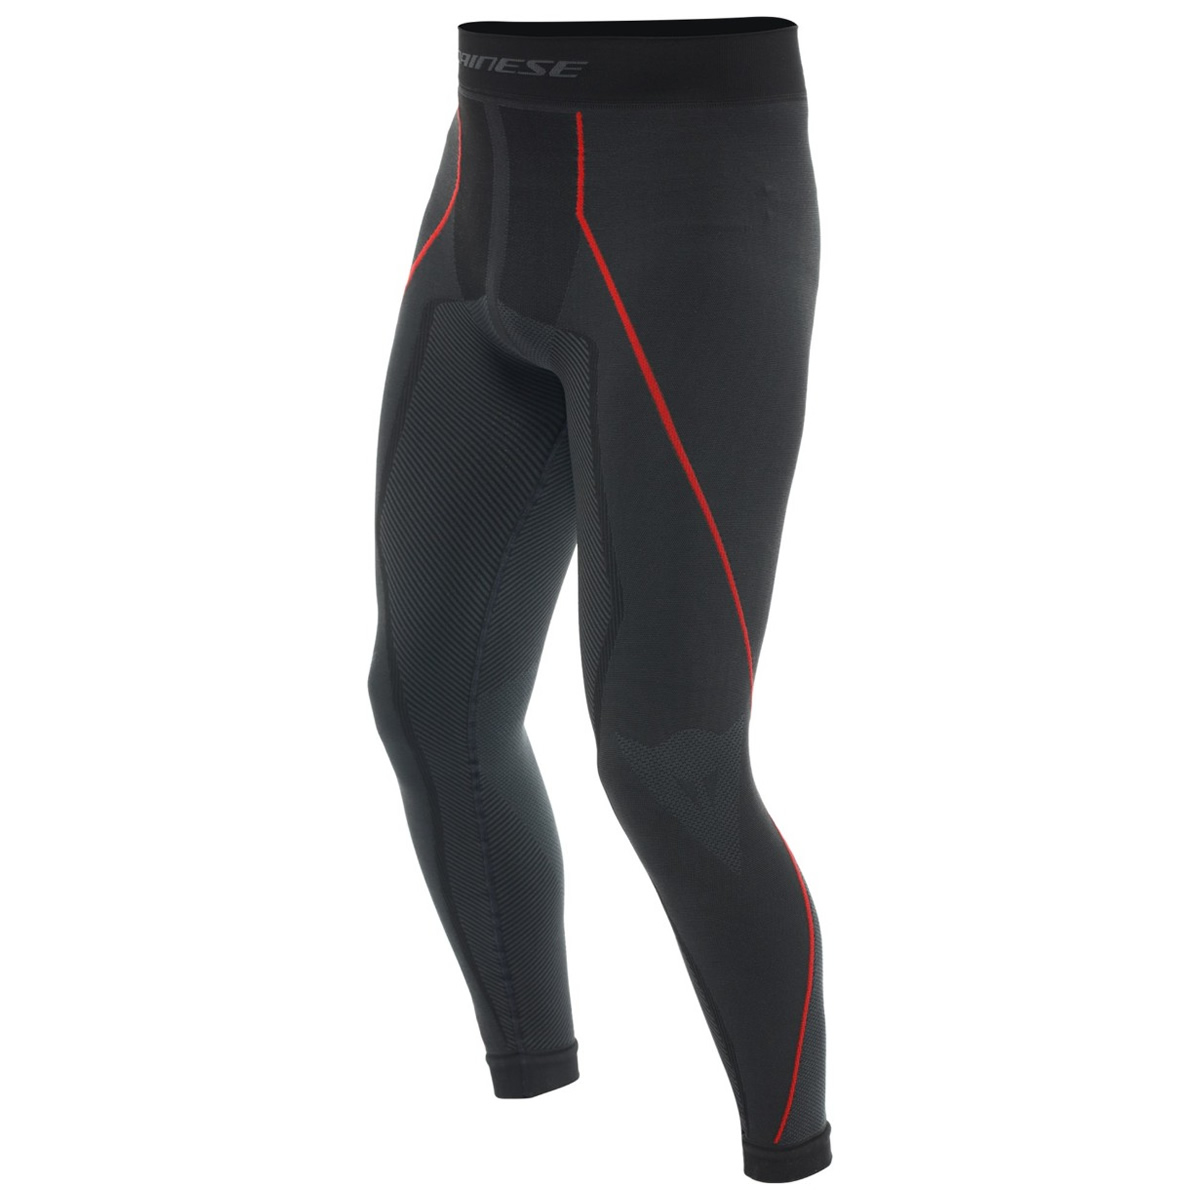 Dainese Funktionshose Thermo Pants, schwarz-rot